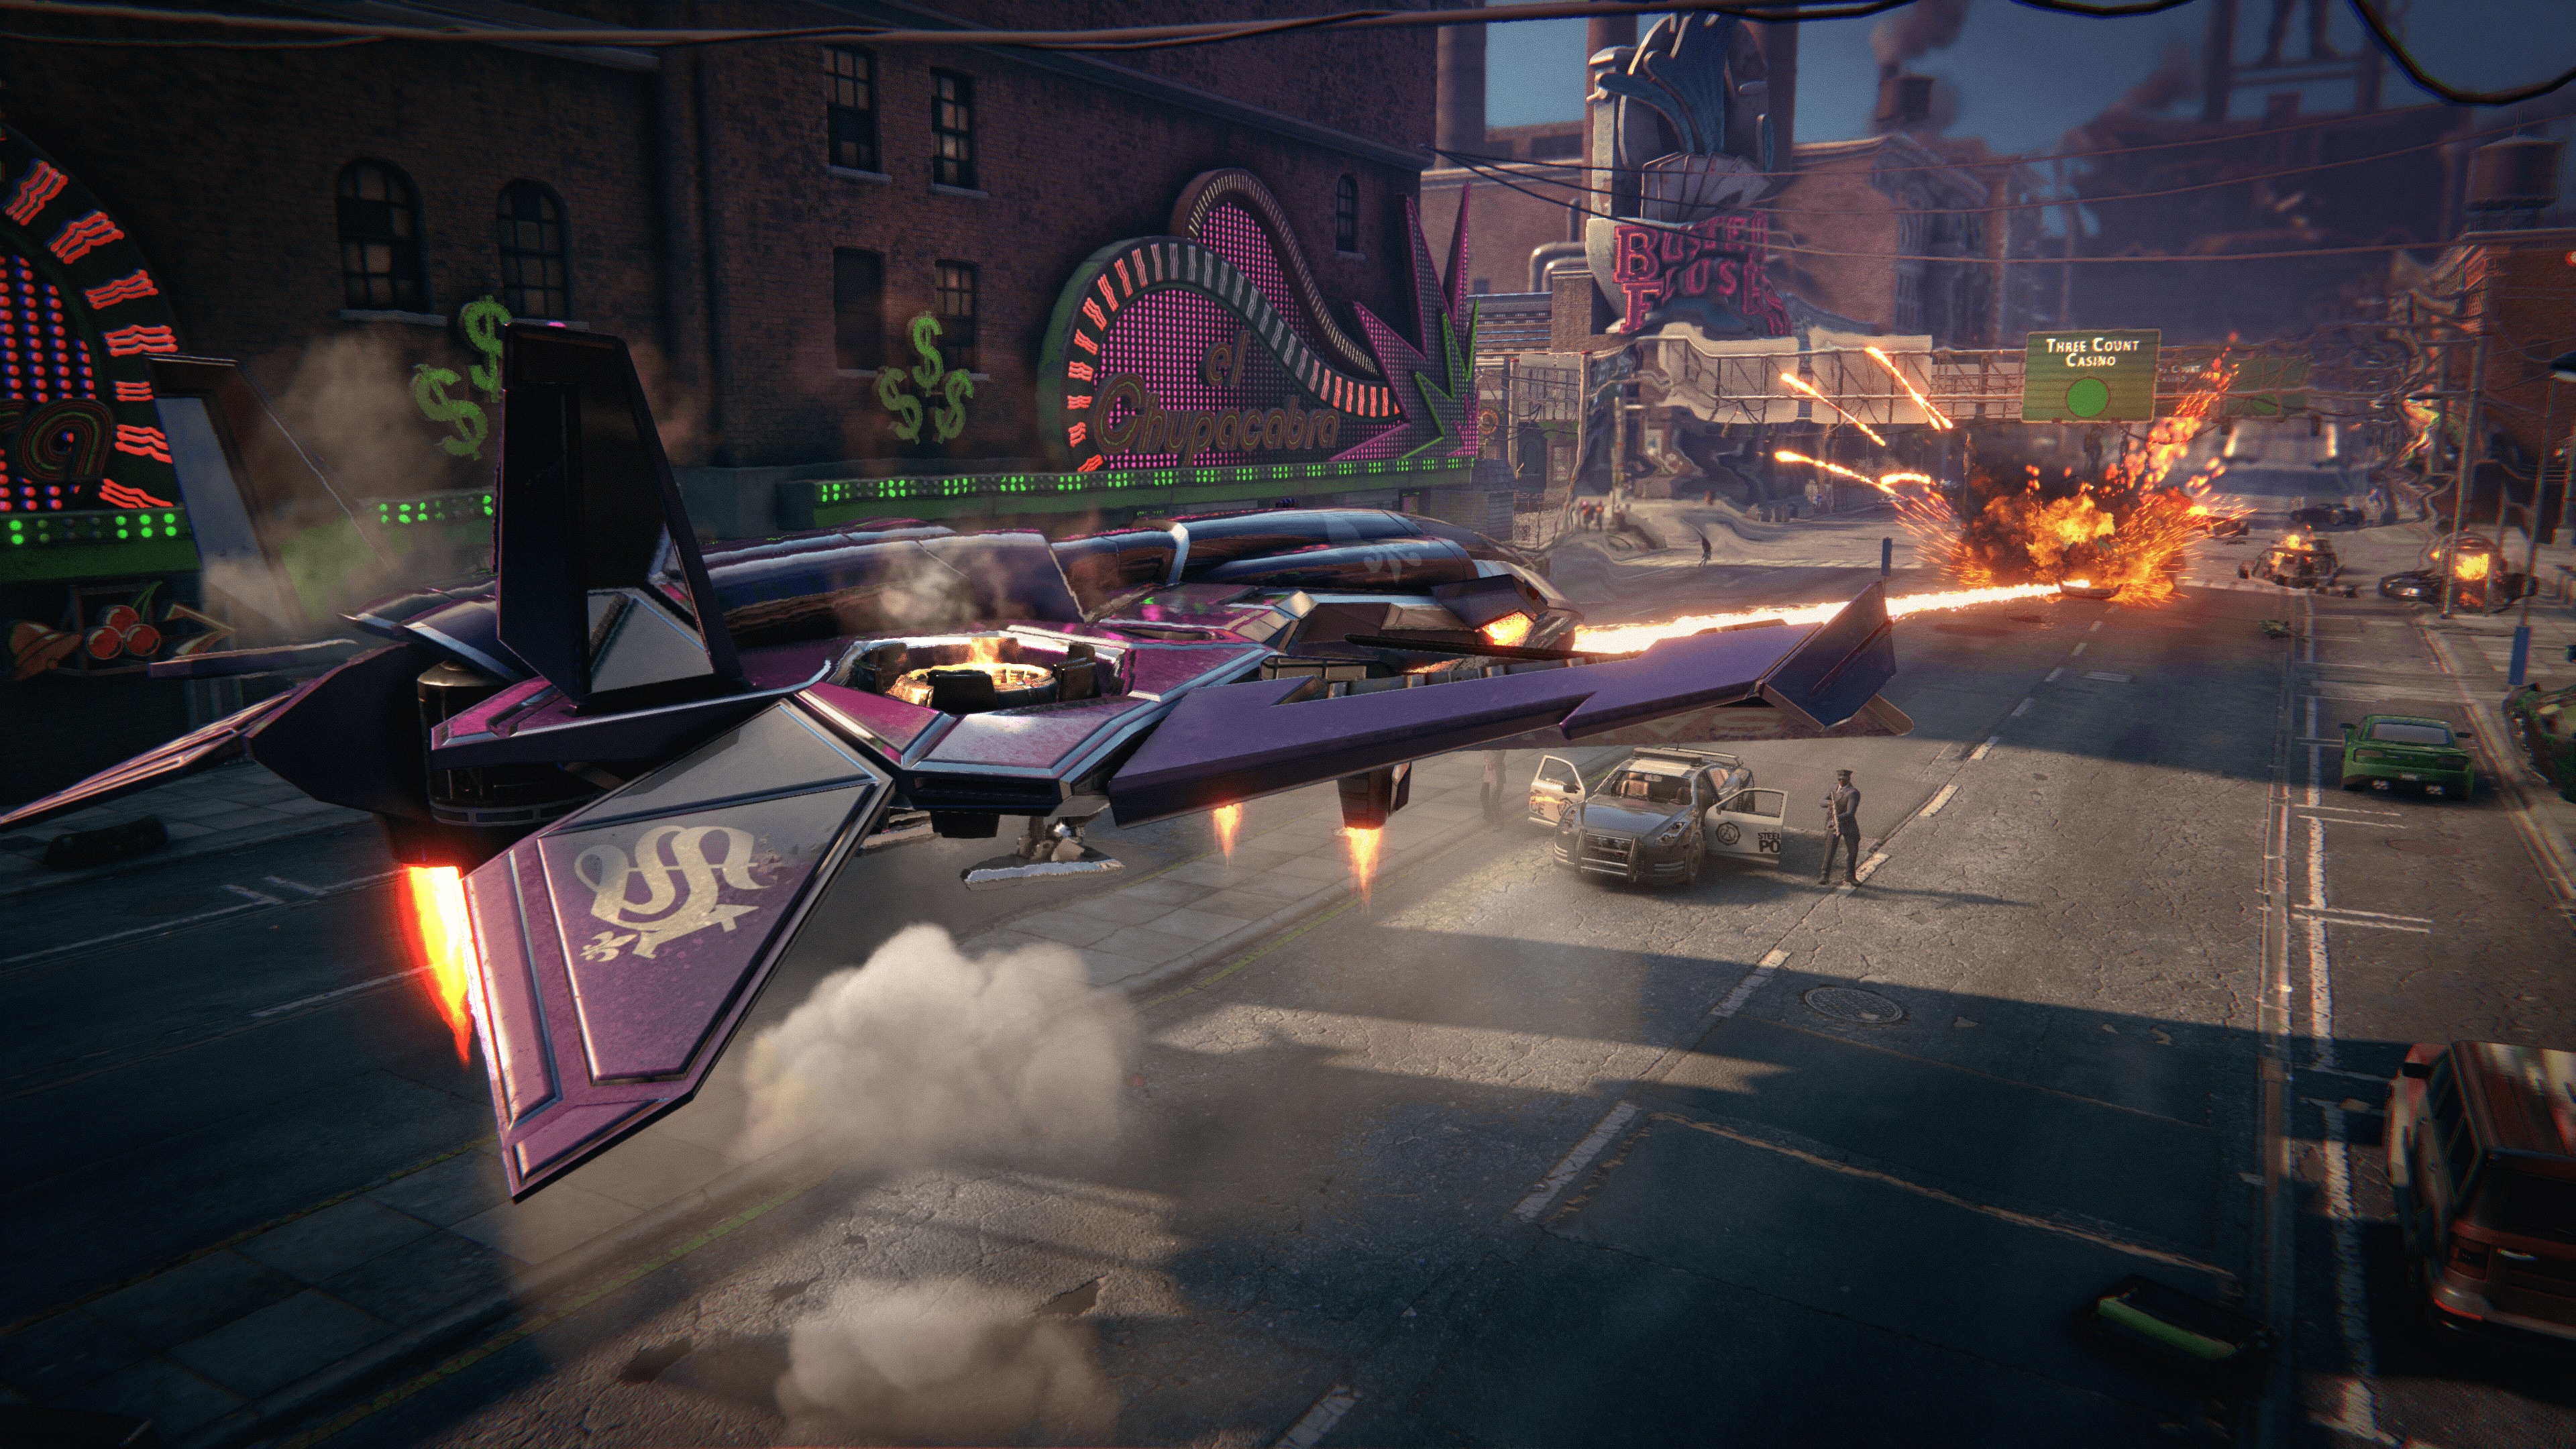 Saints Row: The Third Remastered - HDR gameplay #3 (PC) - High